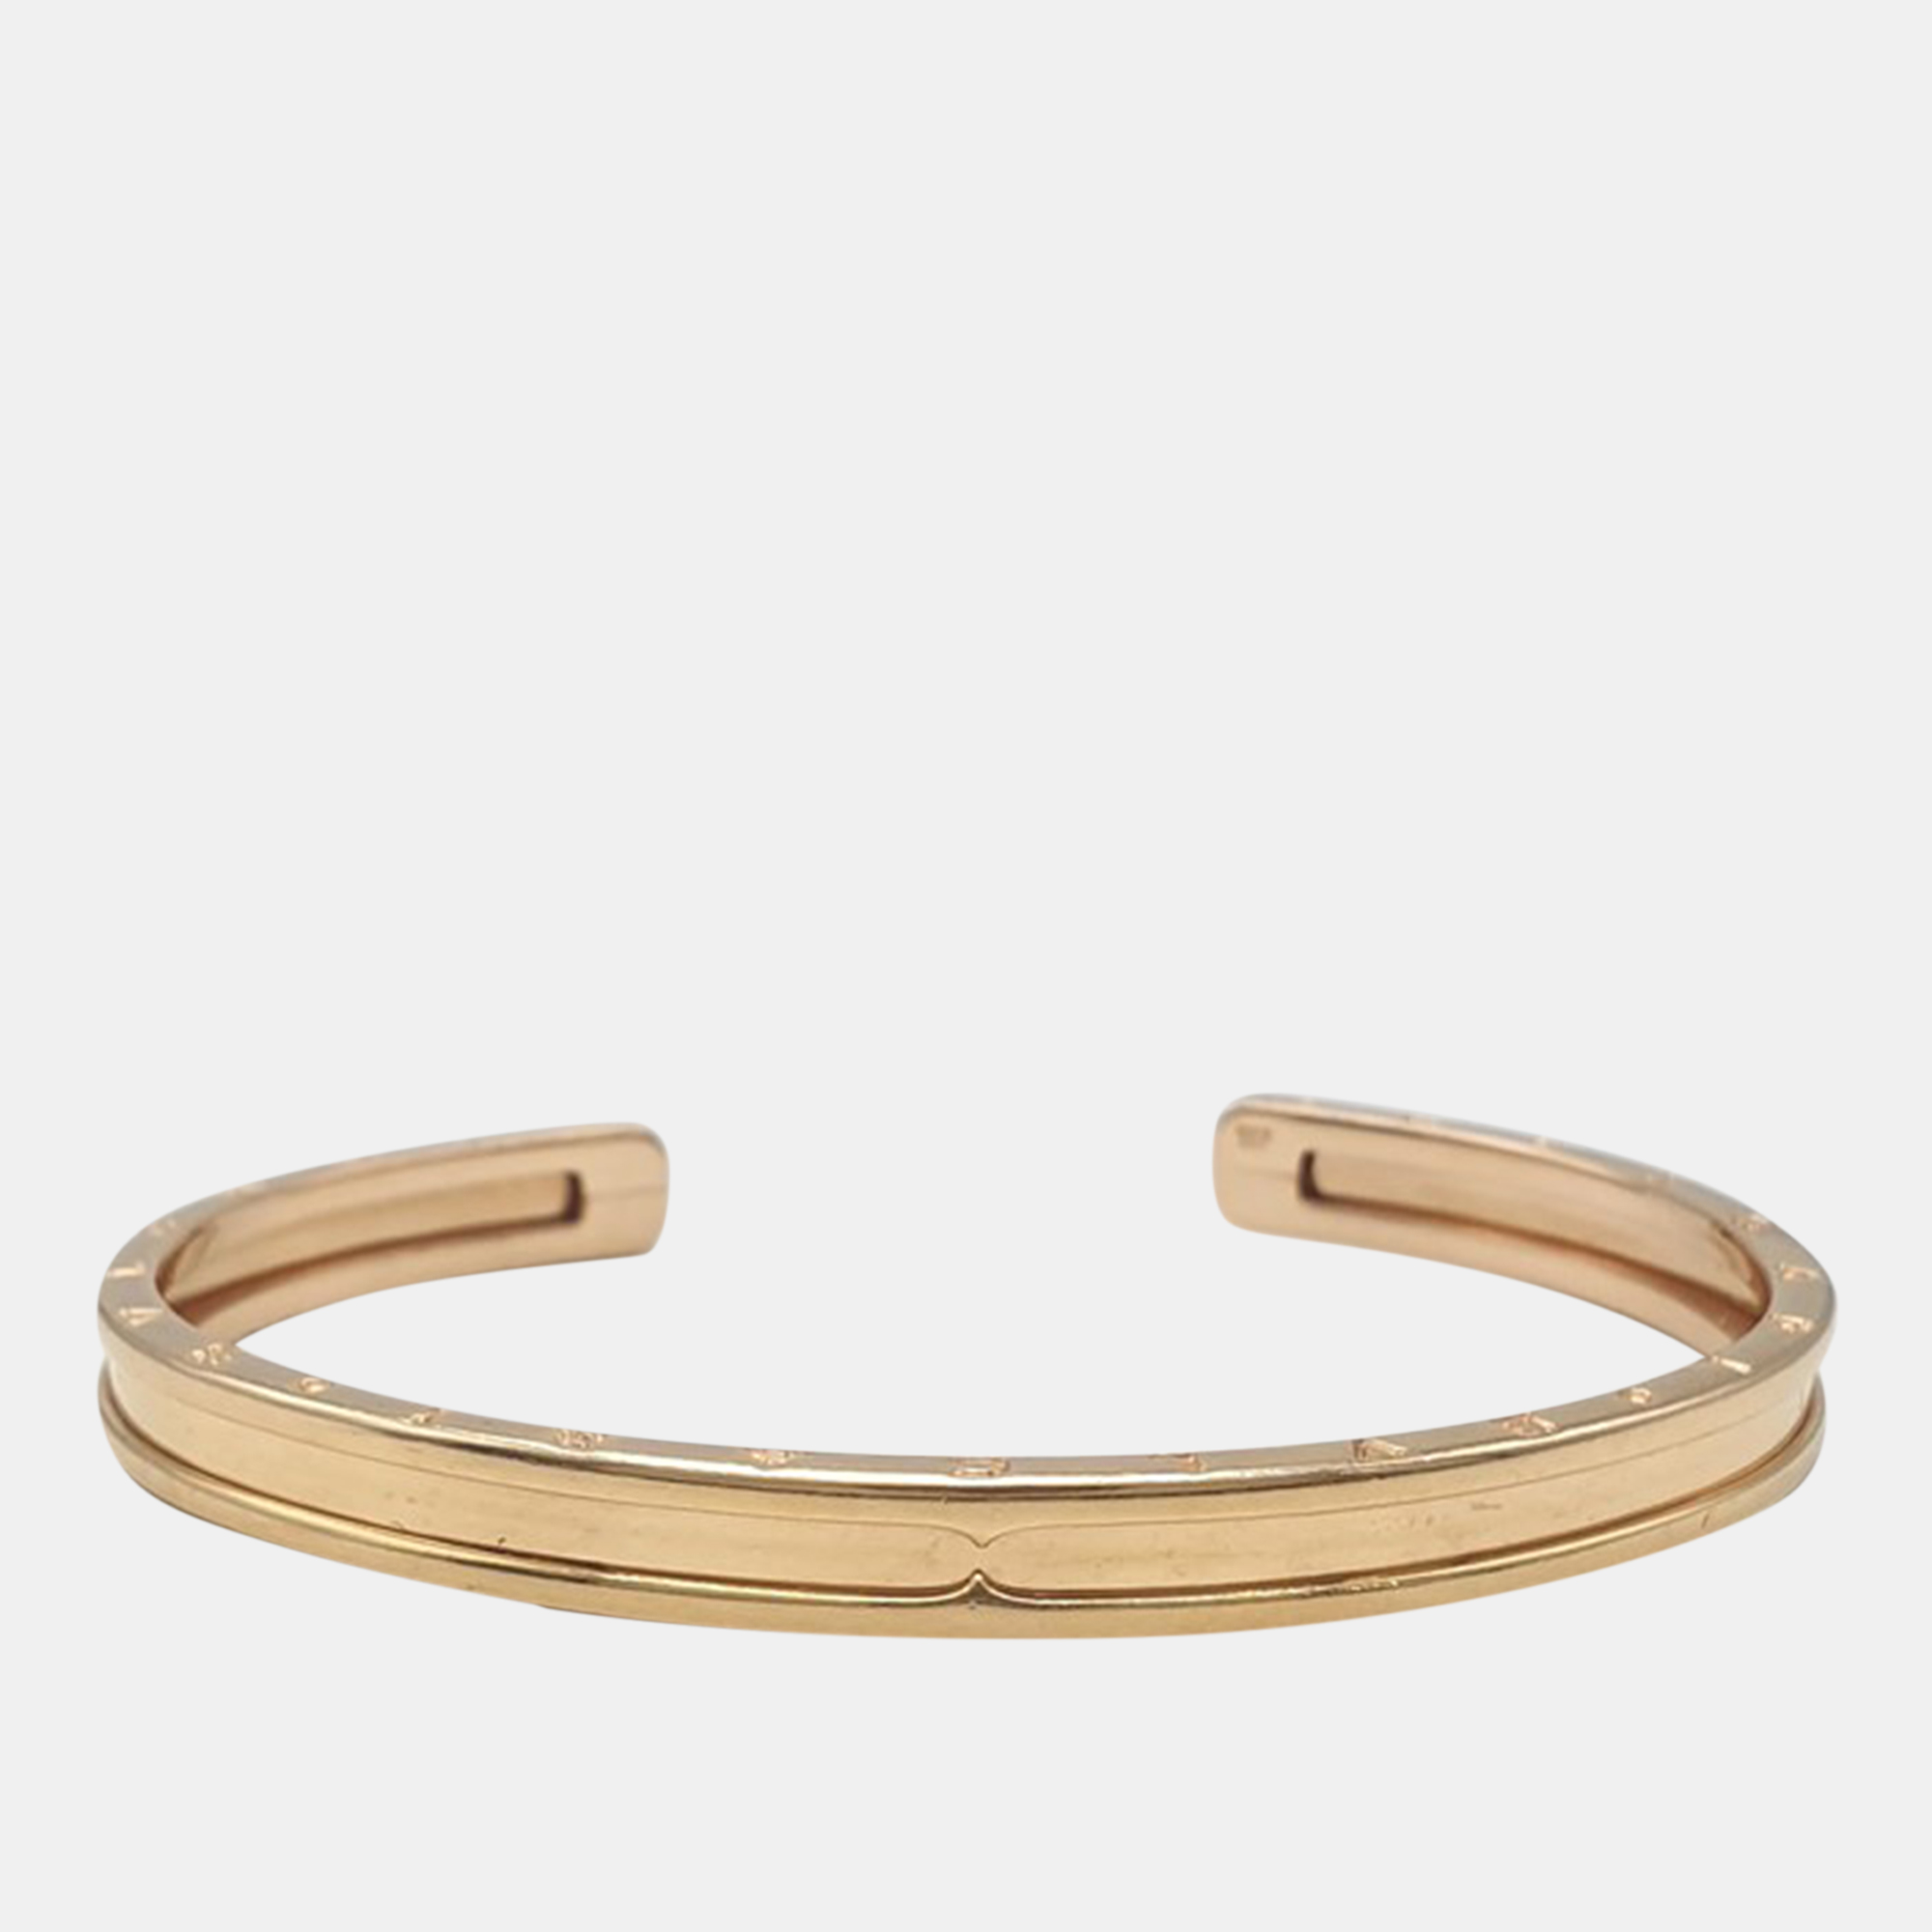 Elevate your wrist with this Bvlgari womens bracelet. Meticulously crafted it exudes elegance and luxury with premium materials exquisite detailing and a timeless design making it the perfect statement piece.